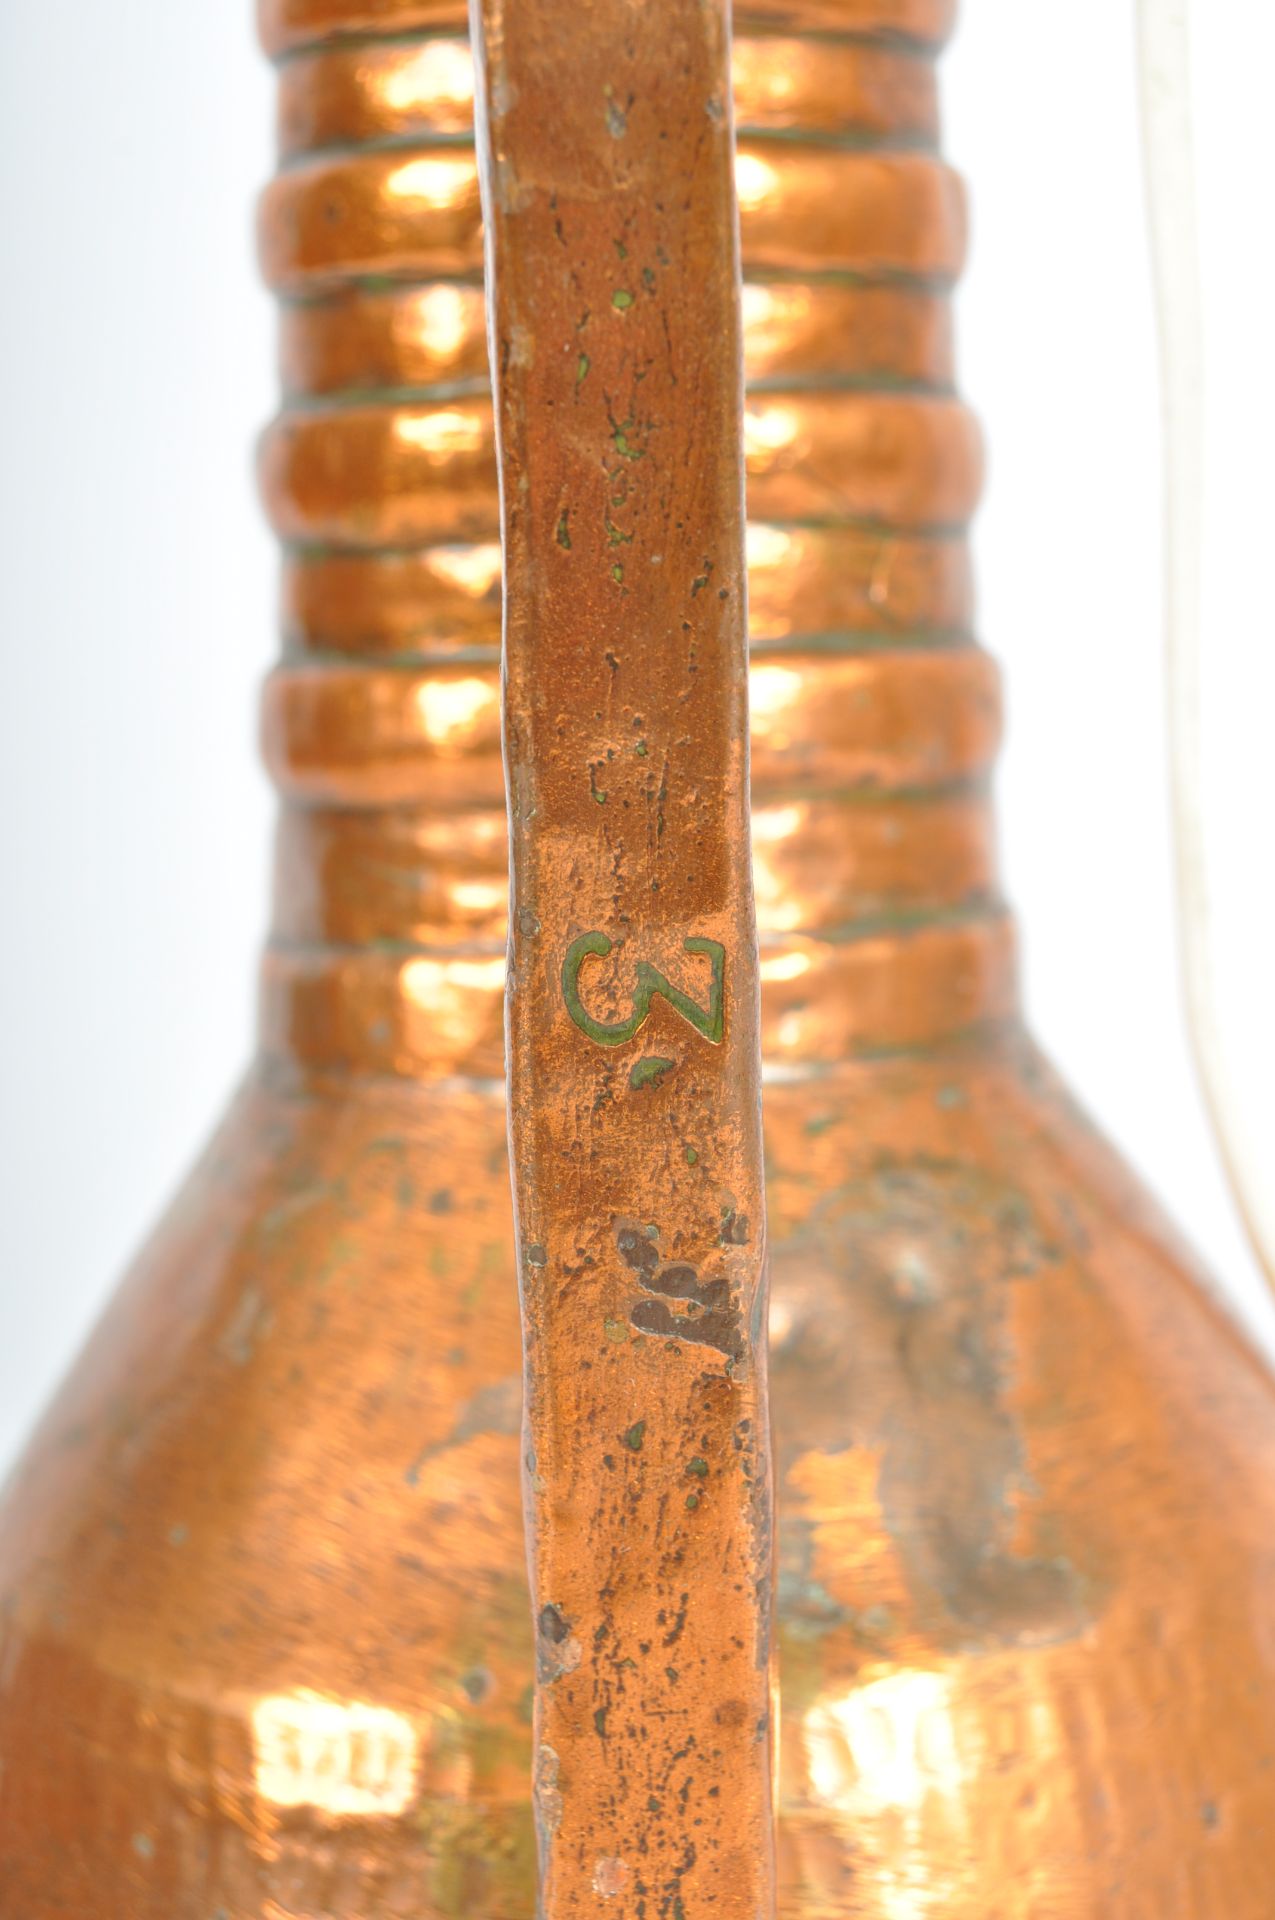 LATE 18TH CENTURY UPCYCLED COPPER EWER JUG LAMP - Image 6 of 8